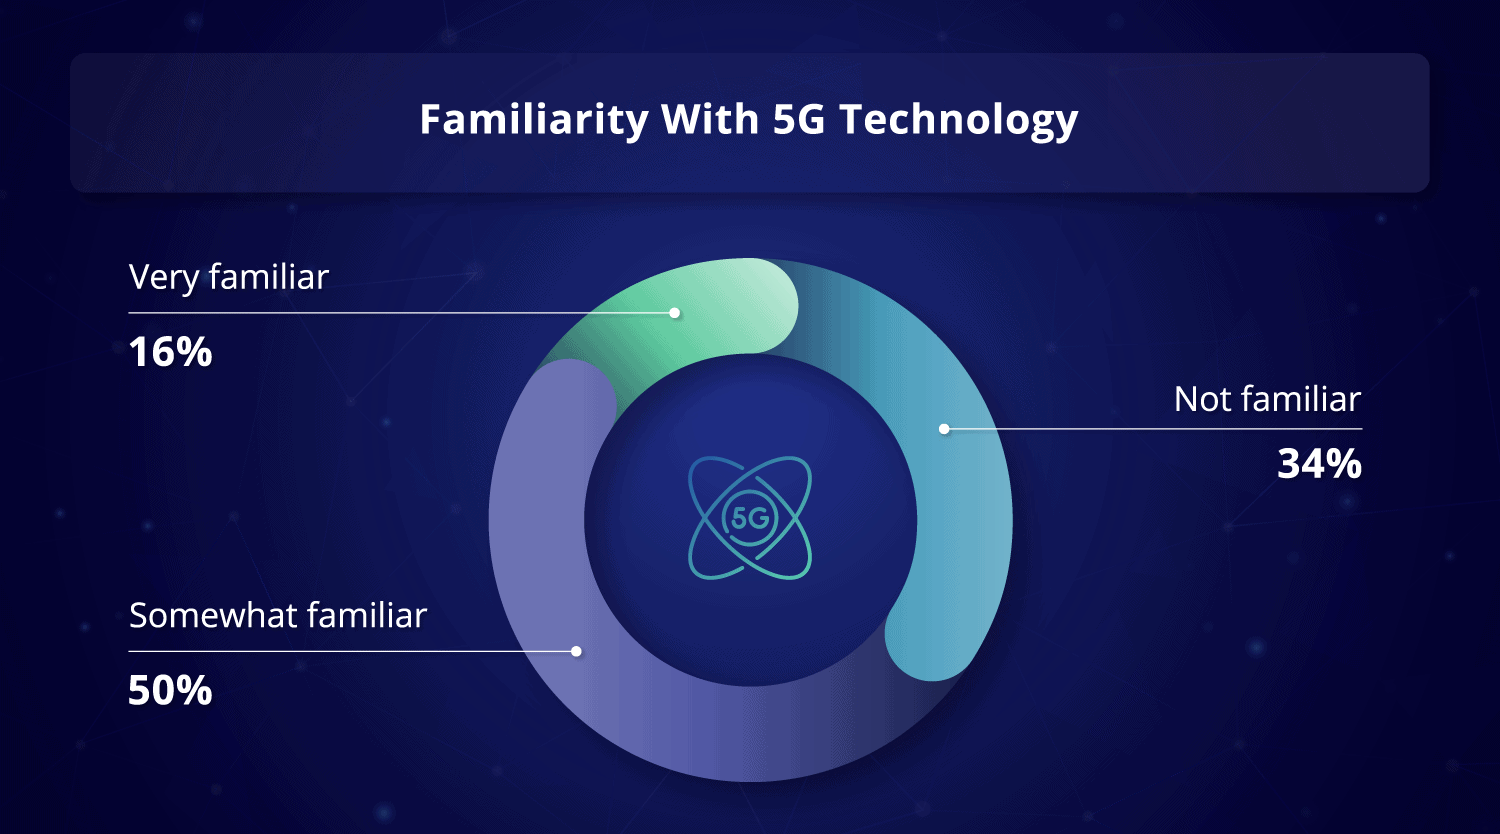 Familiarity with 5G Technology